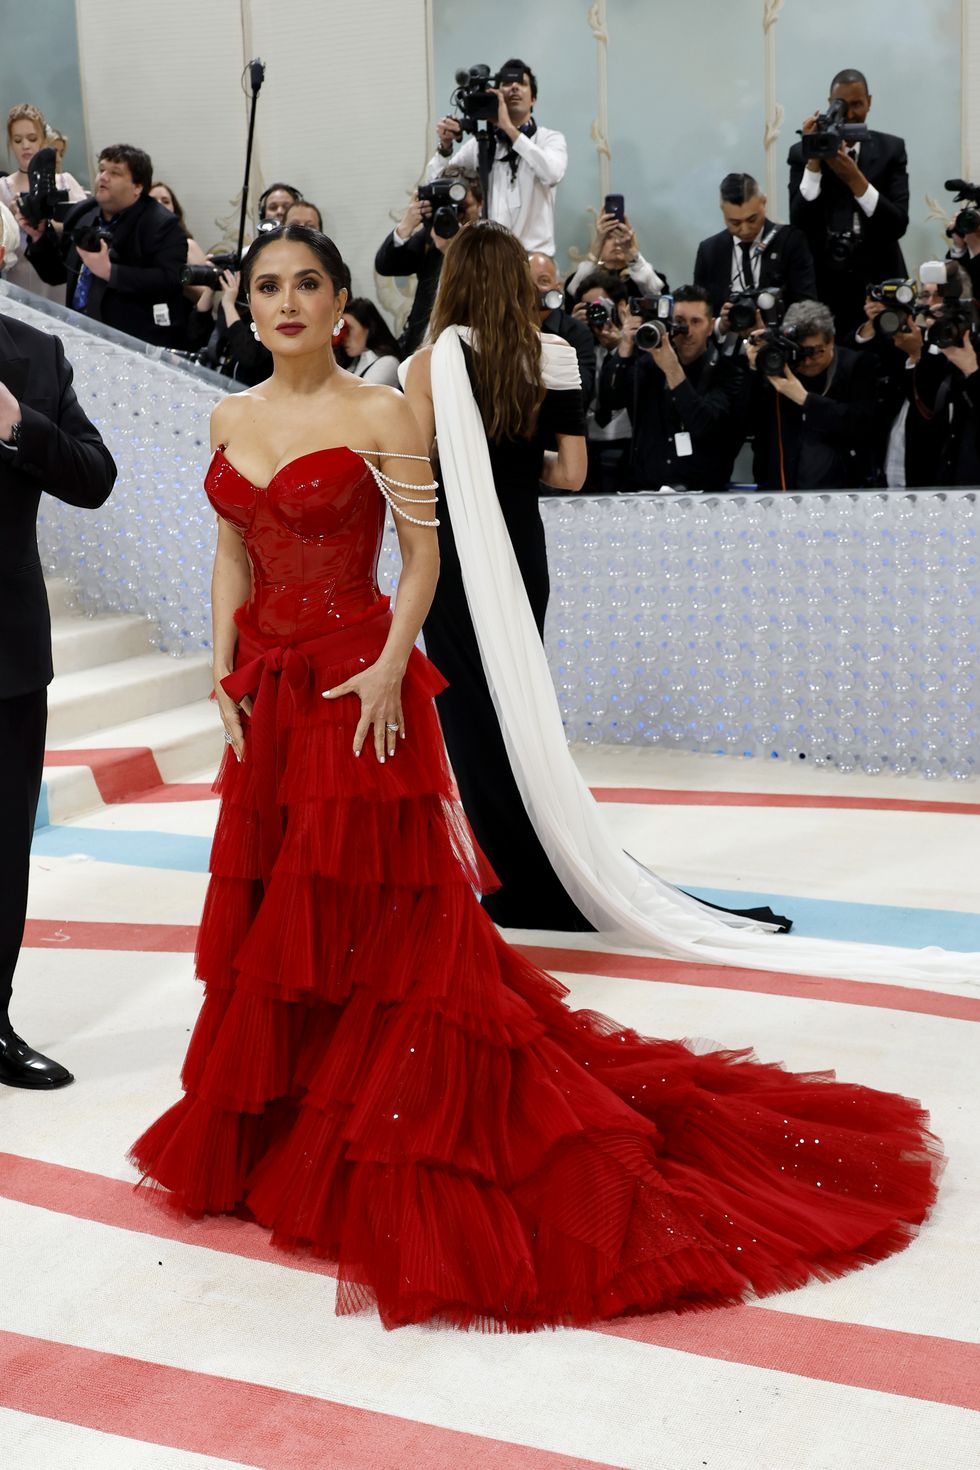 Met Gala: Best Dressed Stars on Red Carpet – The Hollywood Reporter